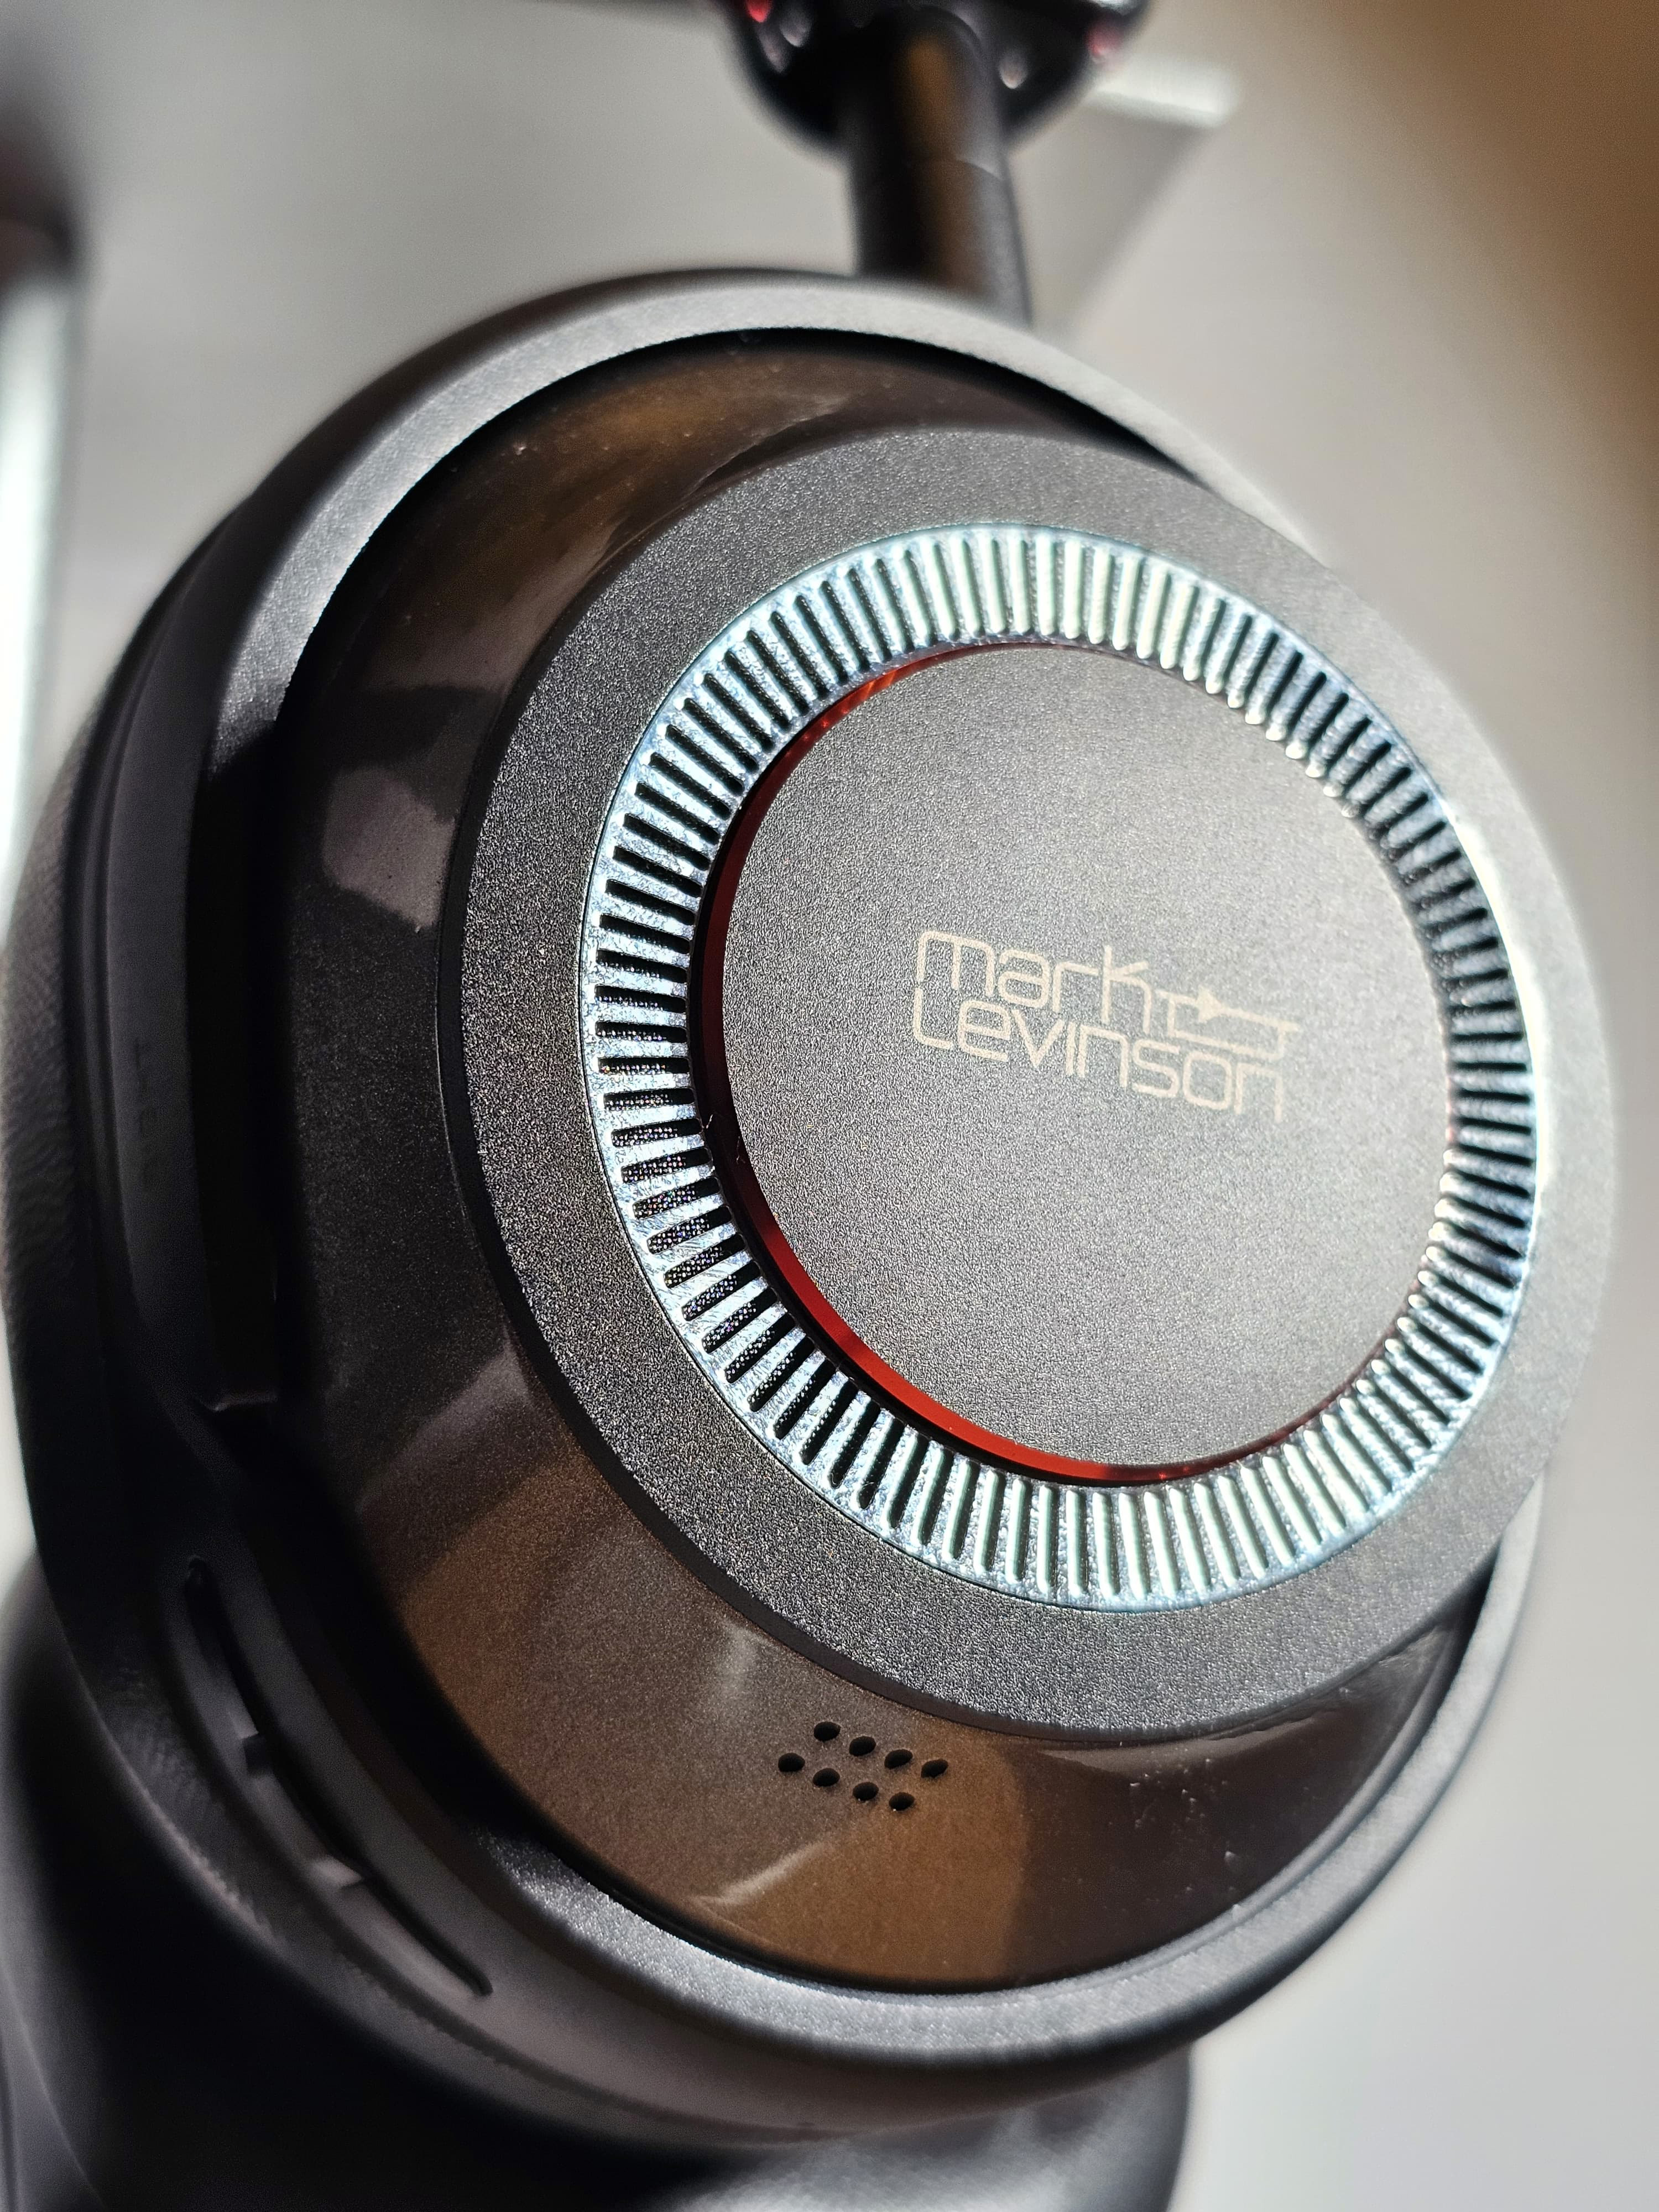 Mark Levinson 5909 – Portable Noise Cancelling Wireless Headphones Review